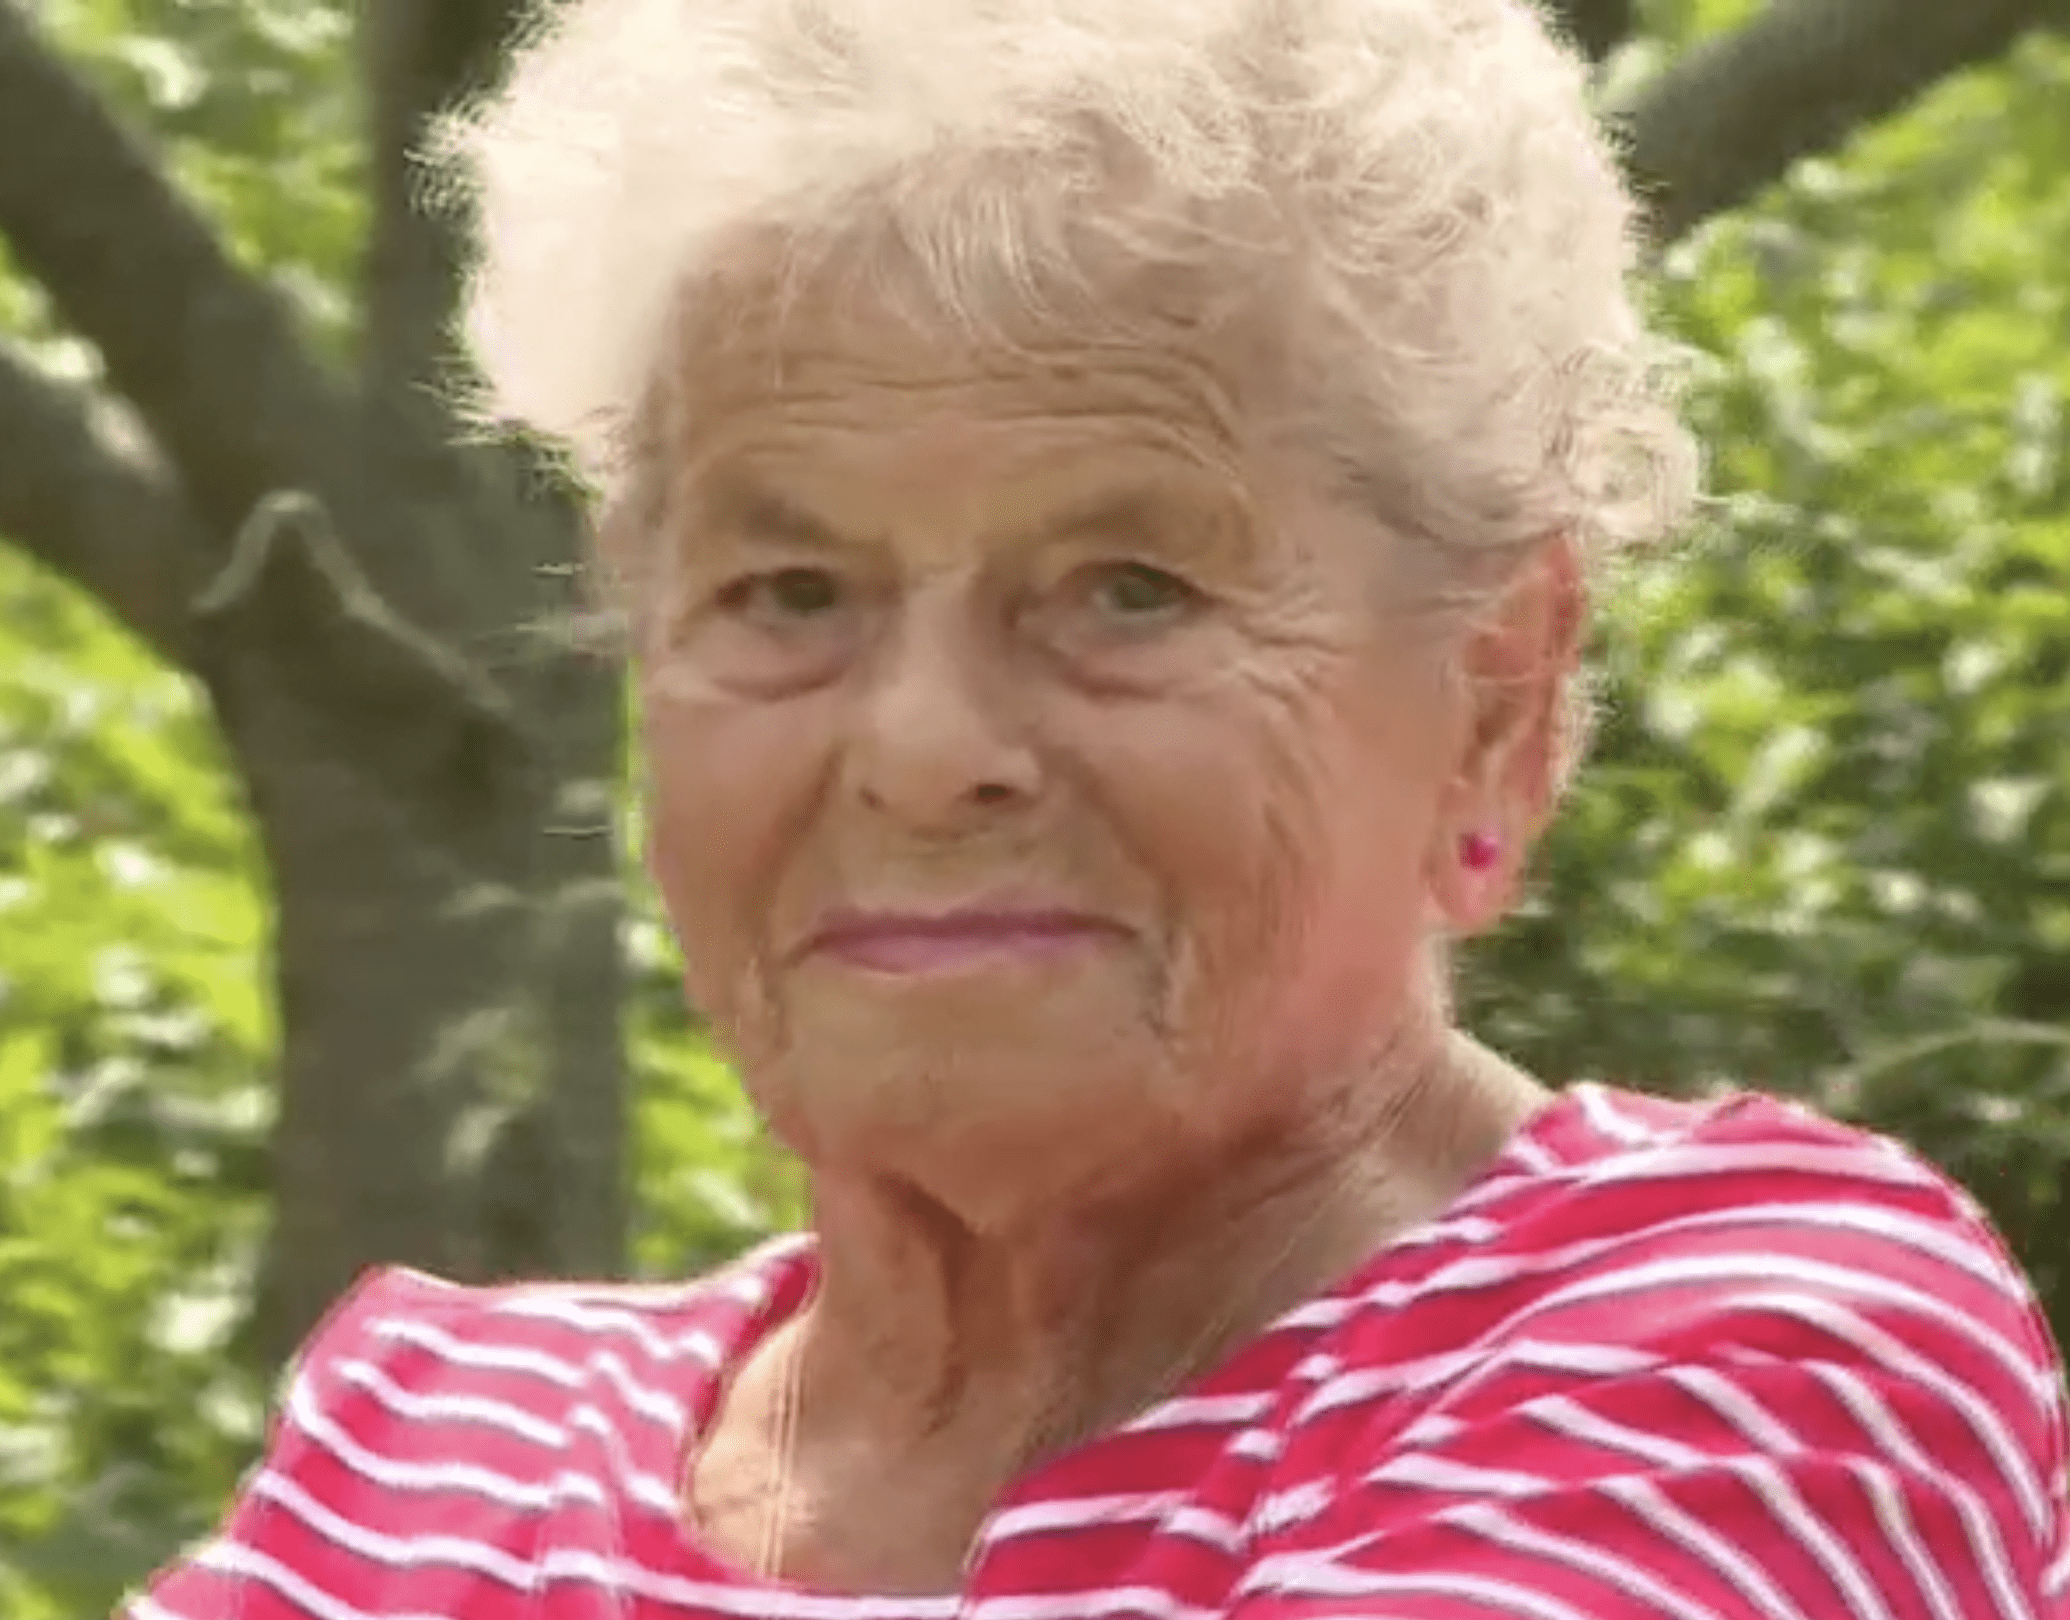 Marie Erickson of Swansea celebrated her birthday in a big way. For more than a year she saved her money to buy herself a John Deere tractor. (WJAR)